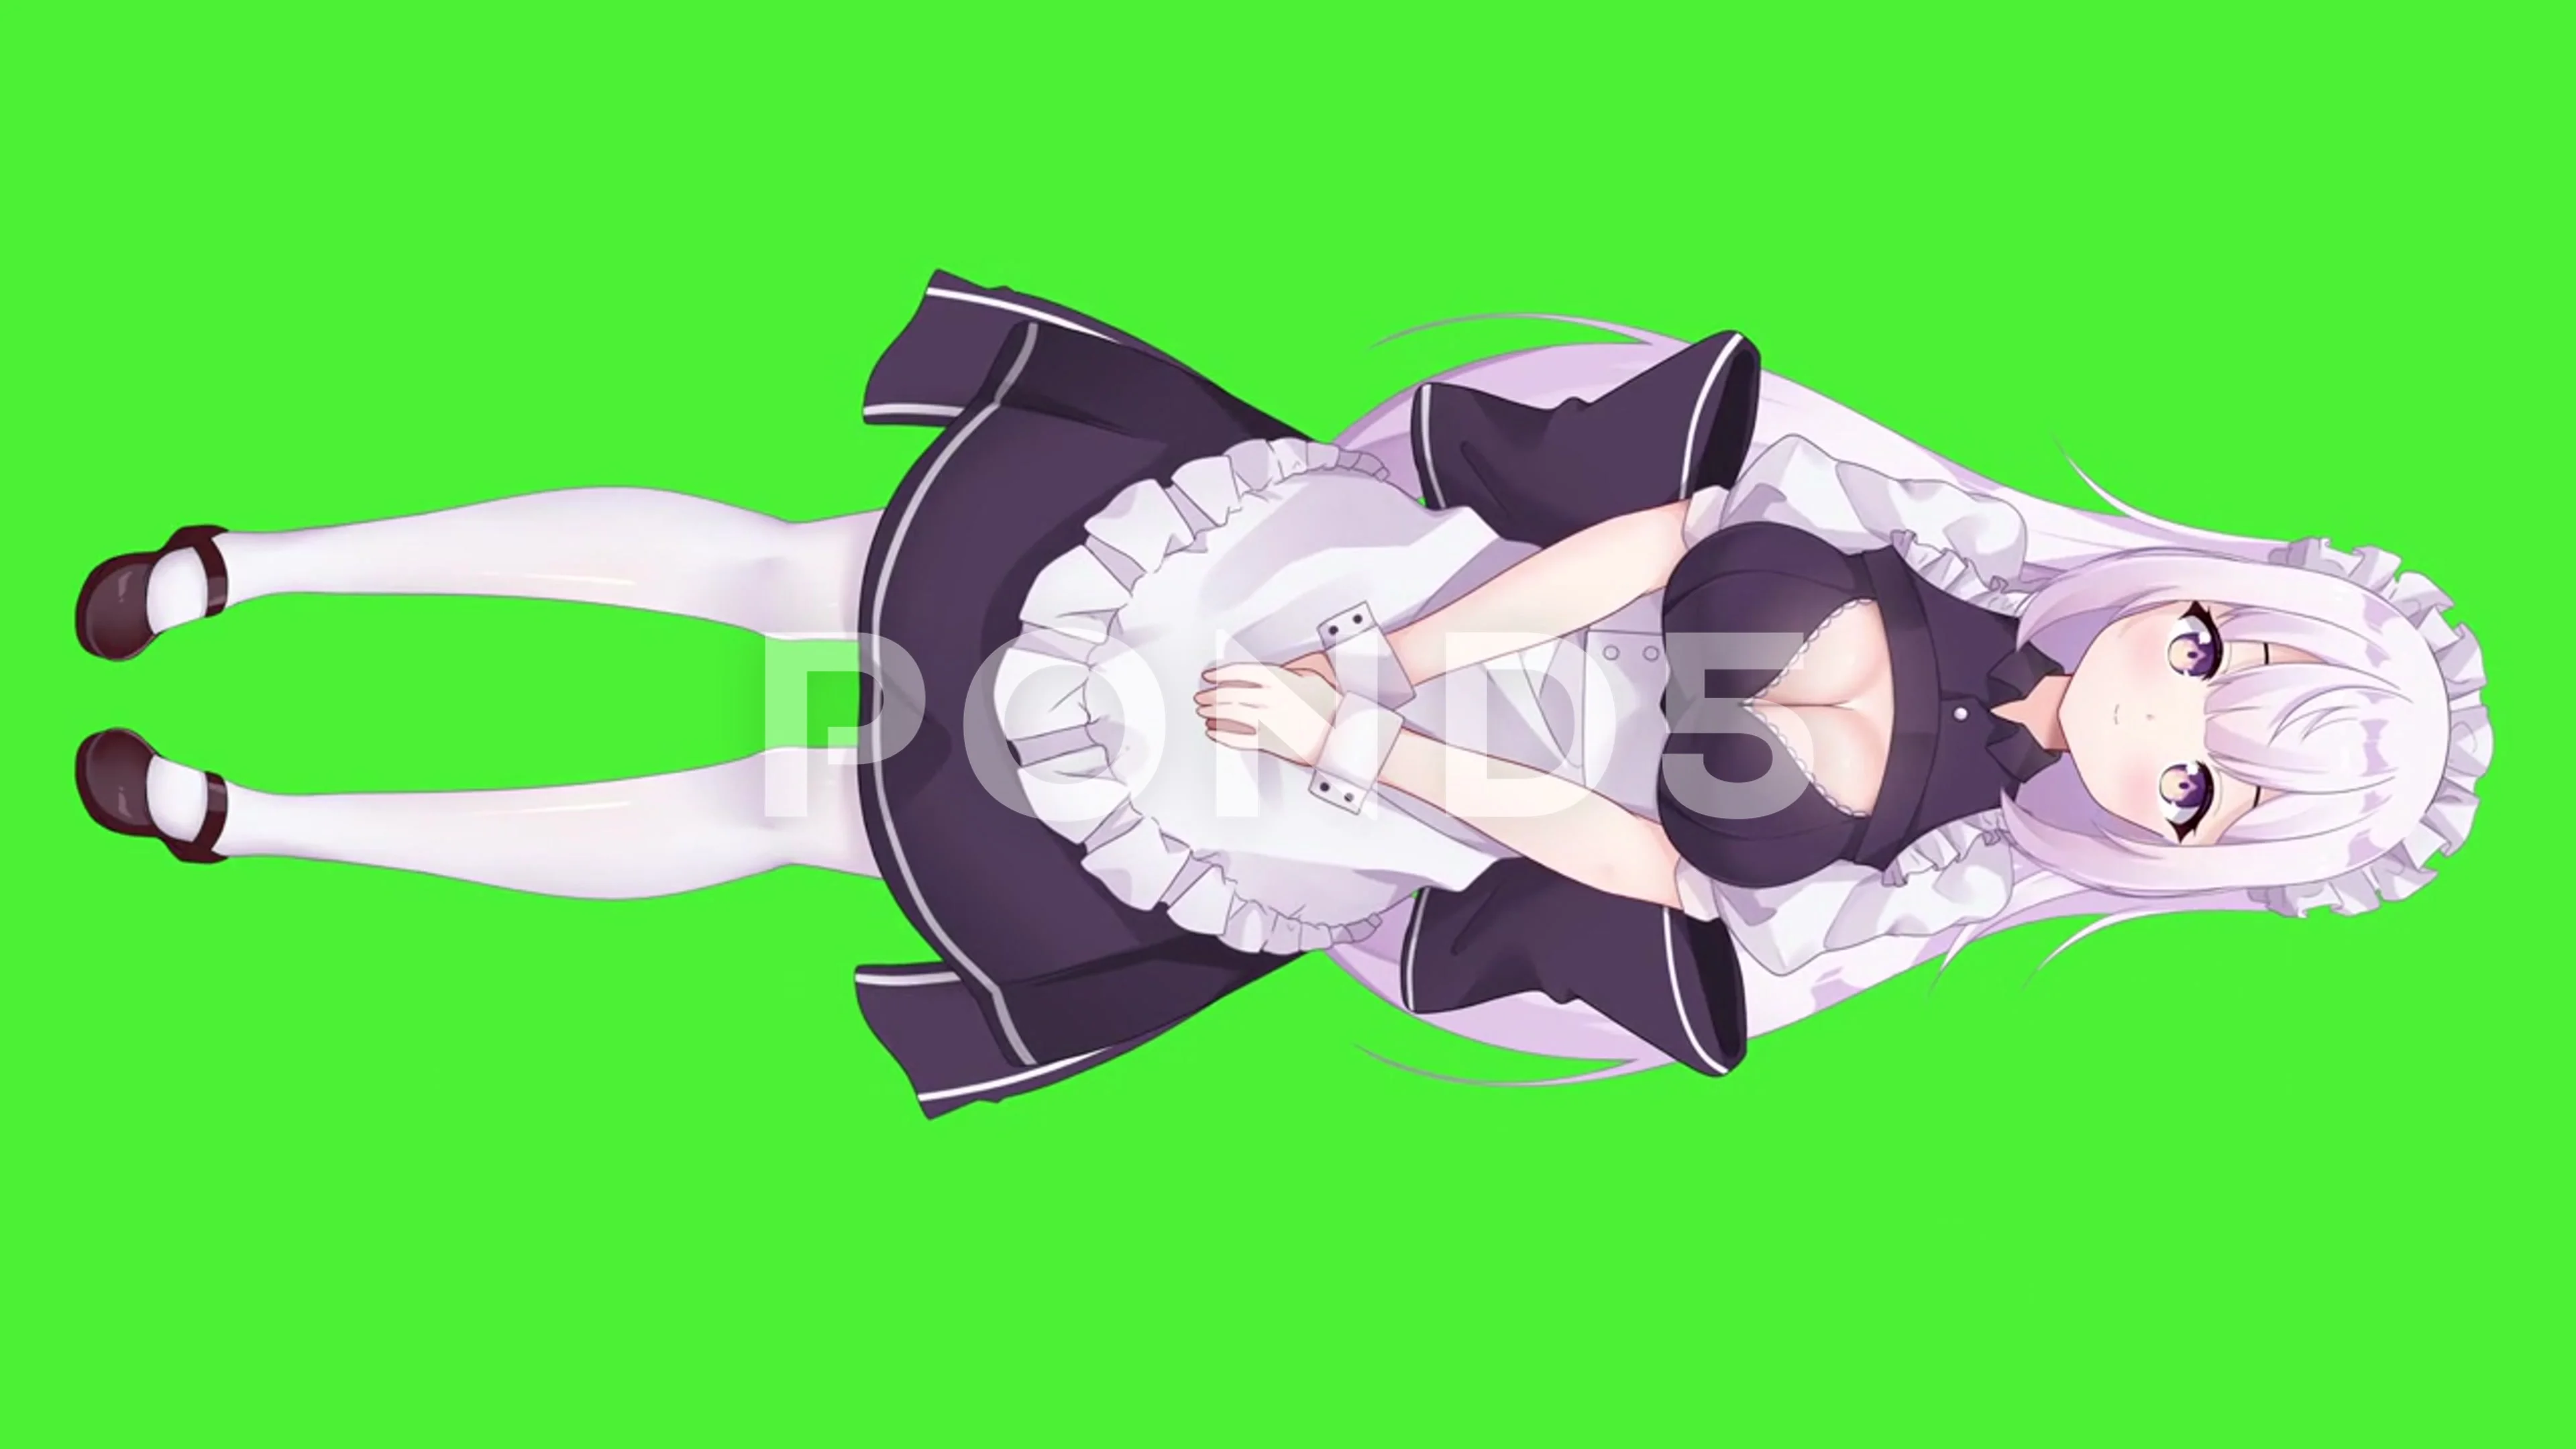 Flat 2d Animation Arrow transition greenscreen background. Anime-style  Arrow in GREENSCREEN. - Stock Image - Everypixel